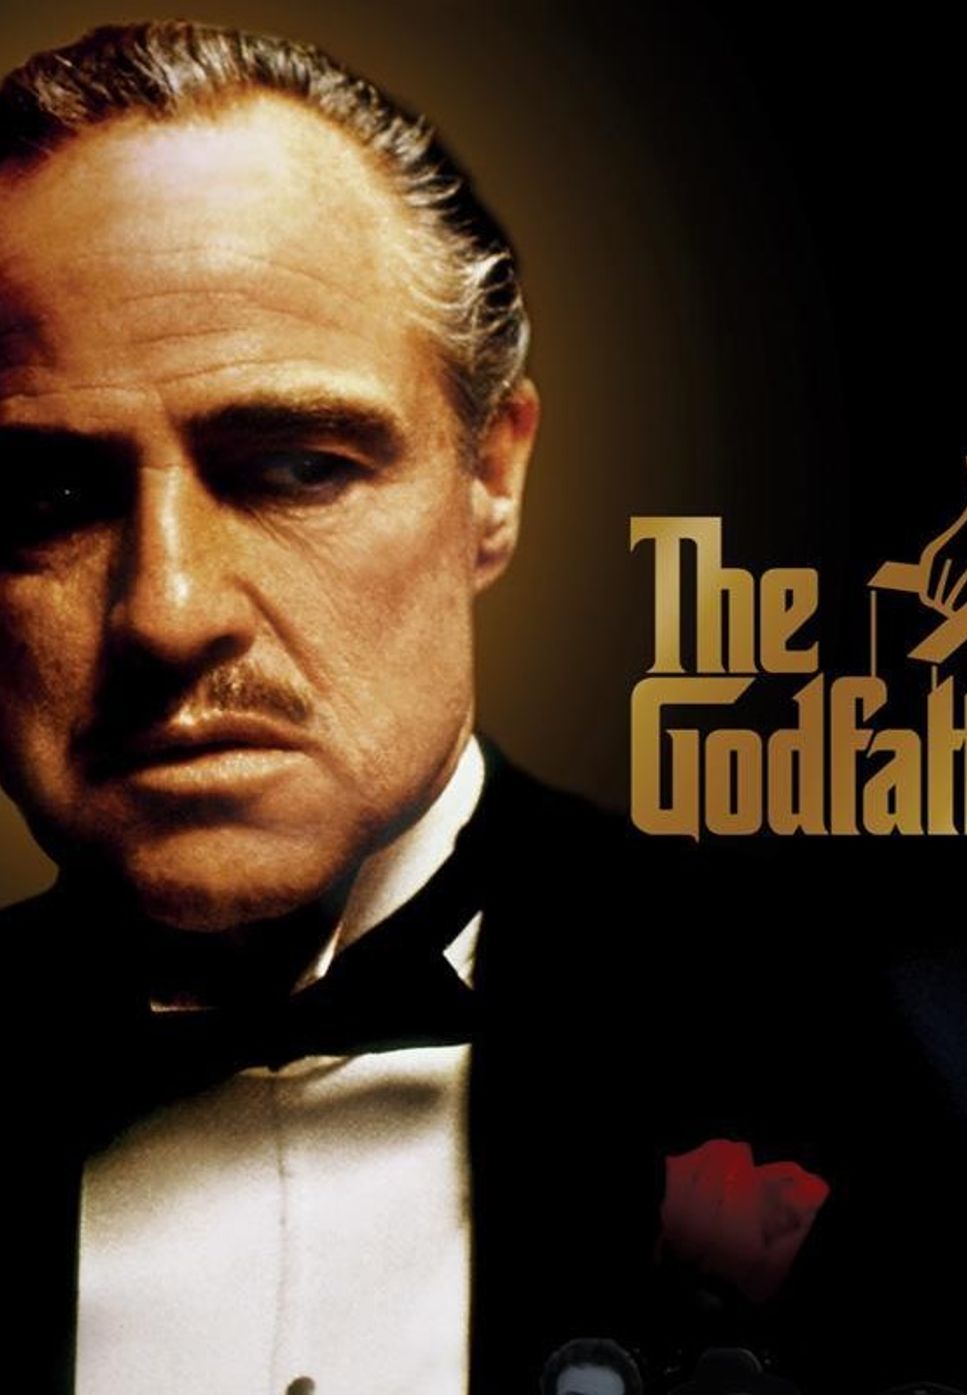 Nino Rota - Love Theme From The Godfather (With Chord For Piano Solo) by poon